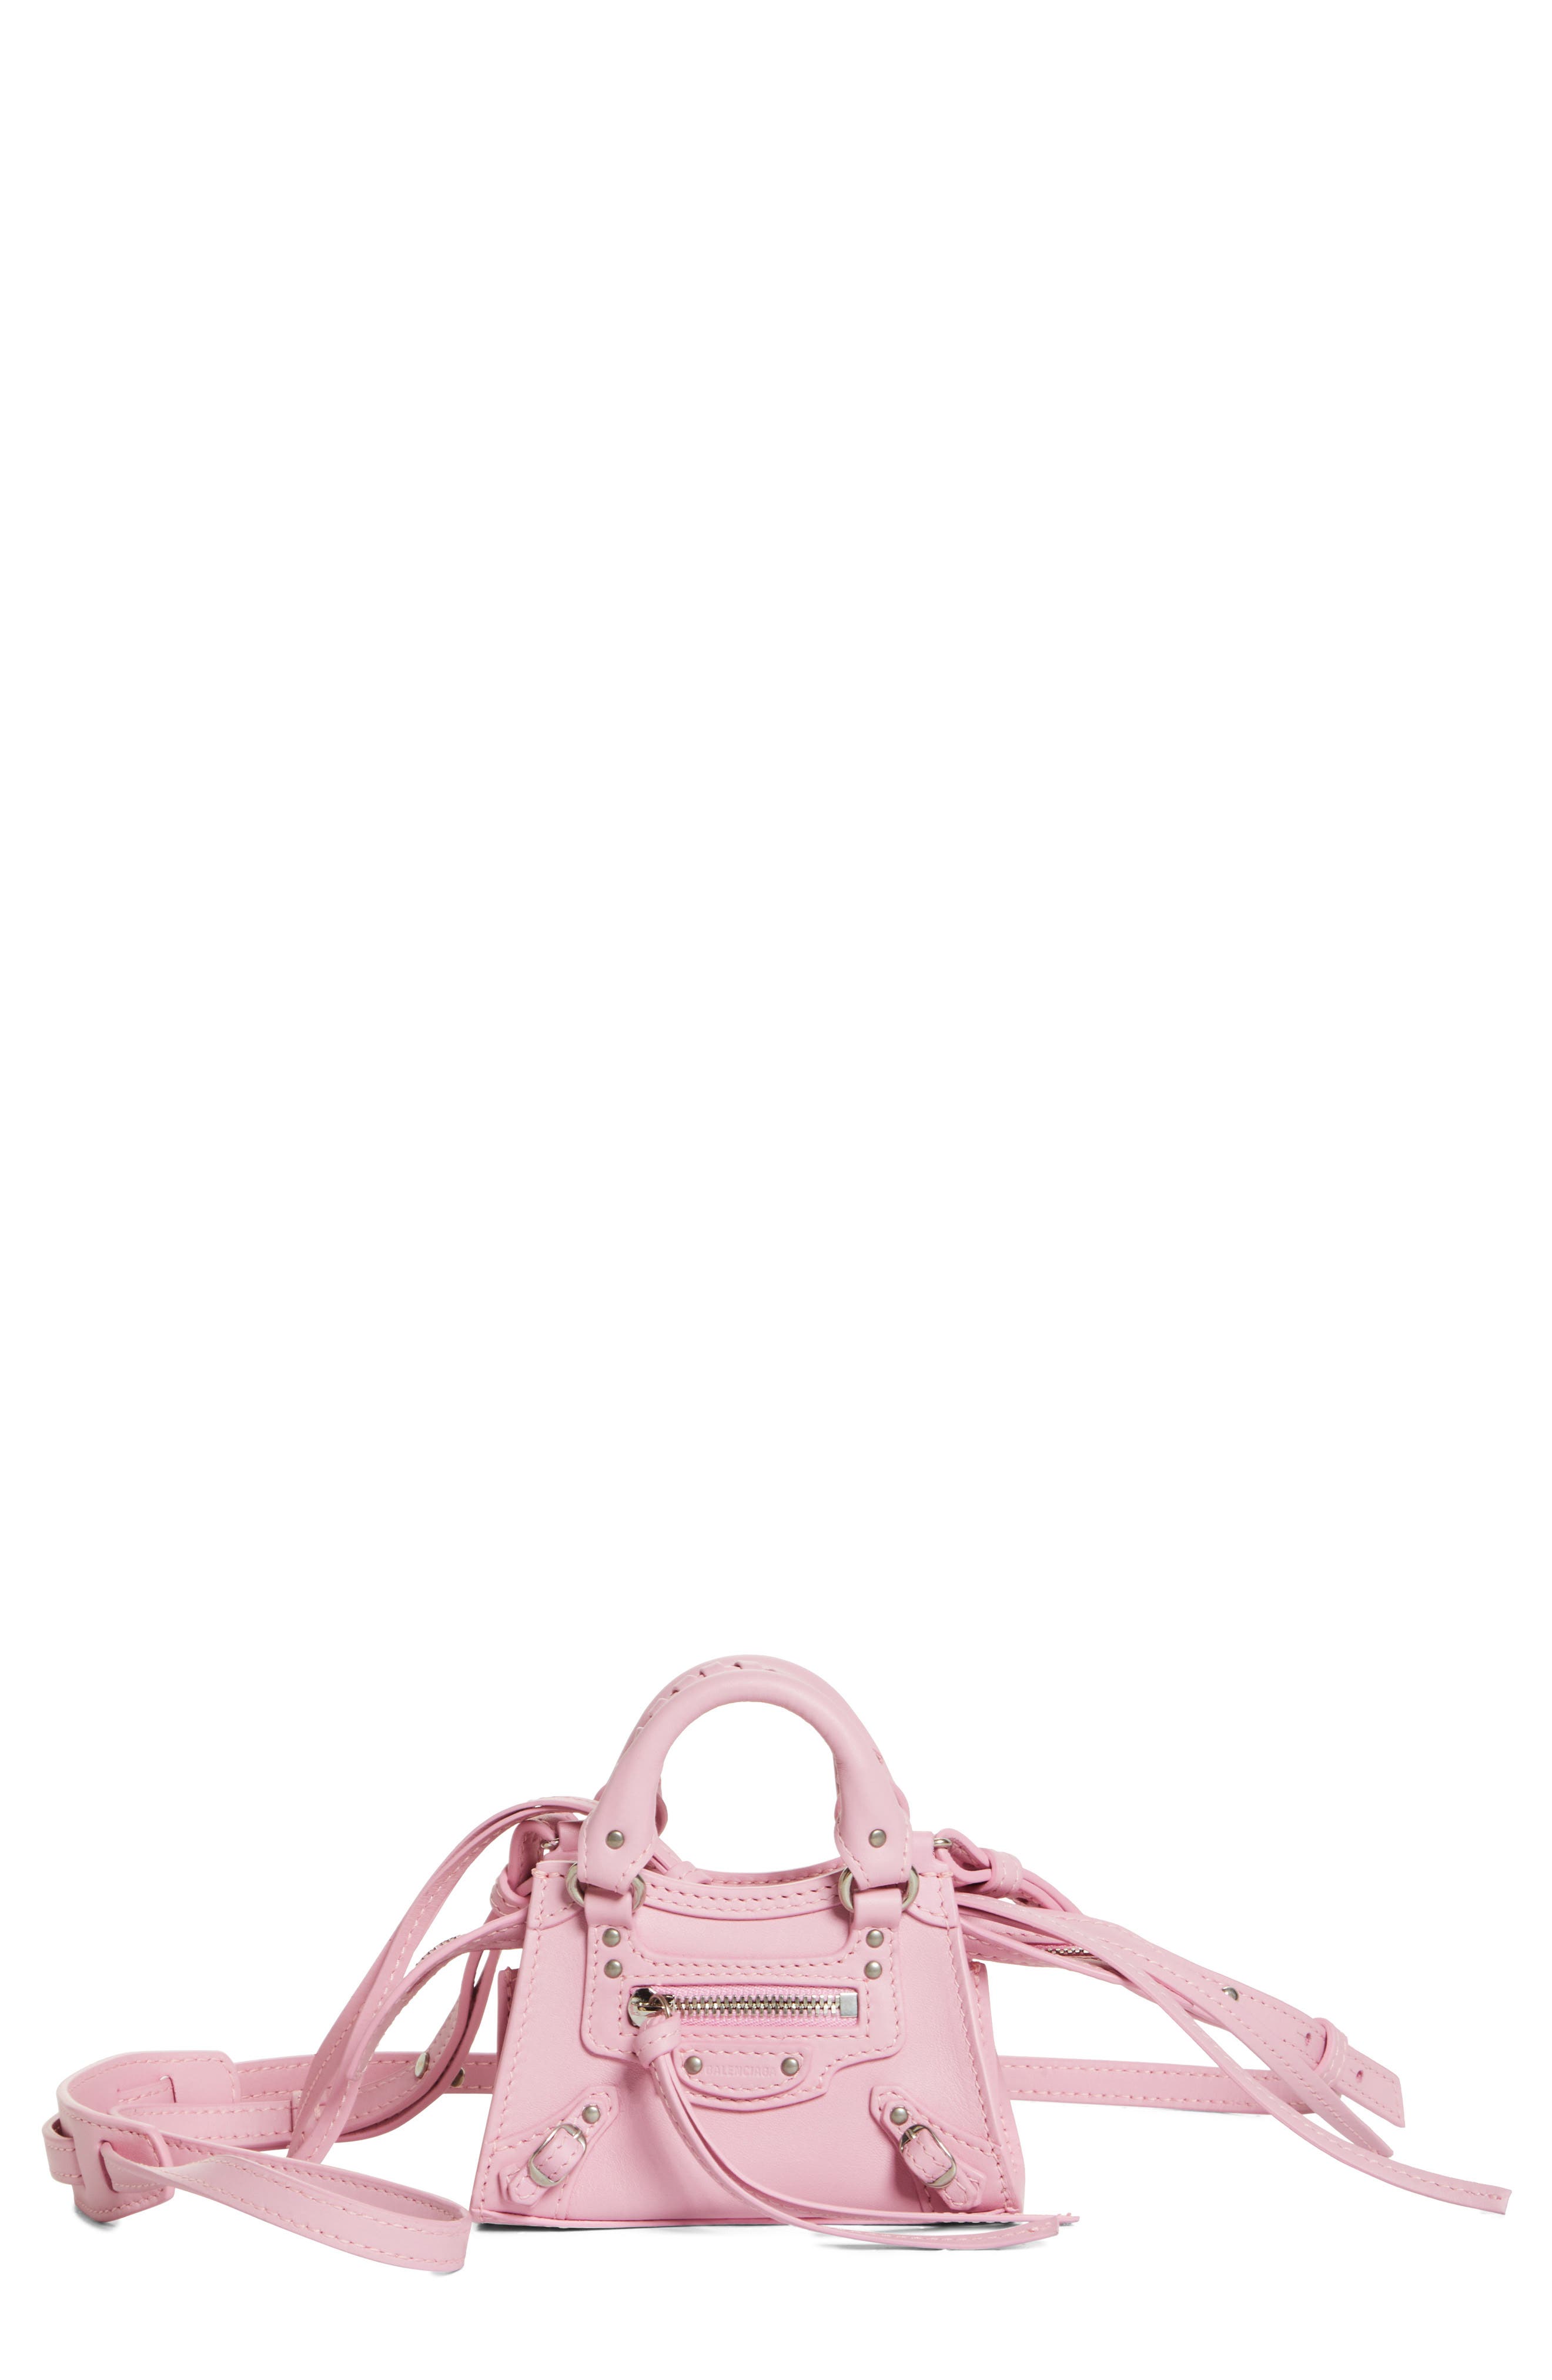 Balenciaga Nano Neo Classic City Leather Top Handle Bag in Candy Pink at Nordstrom